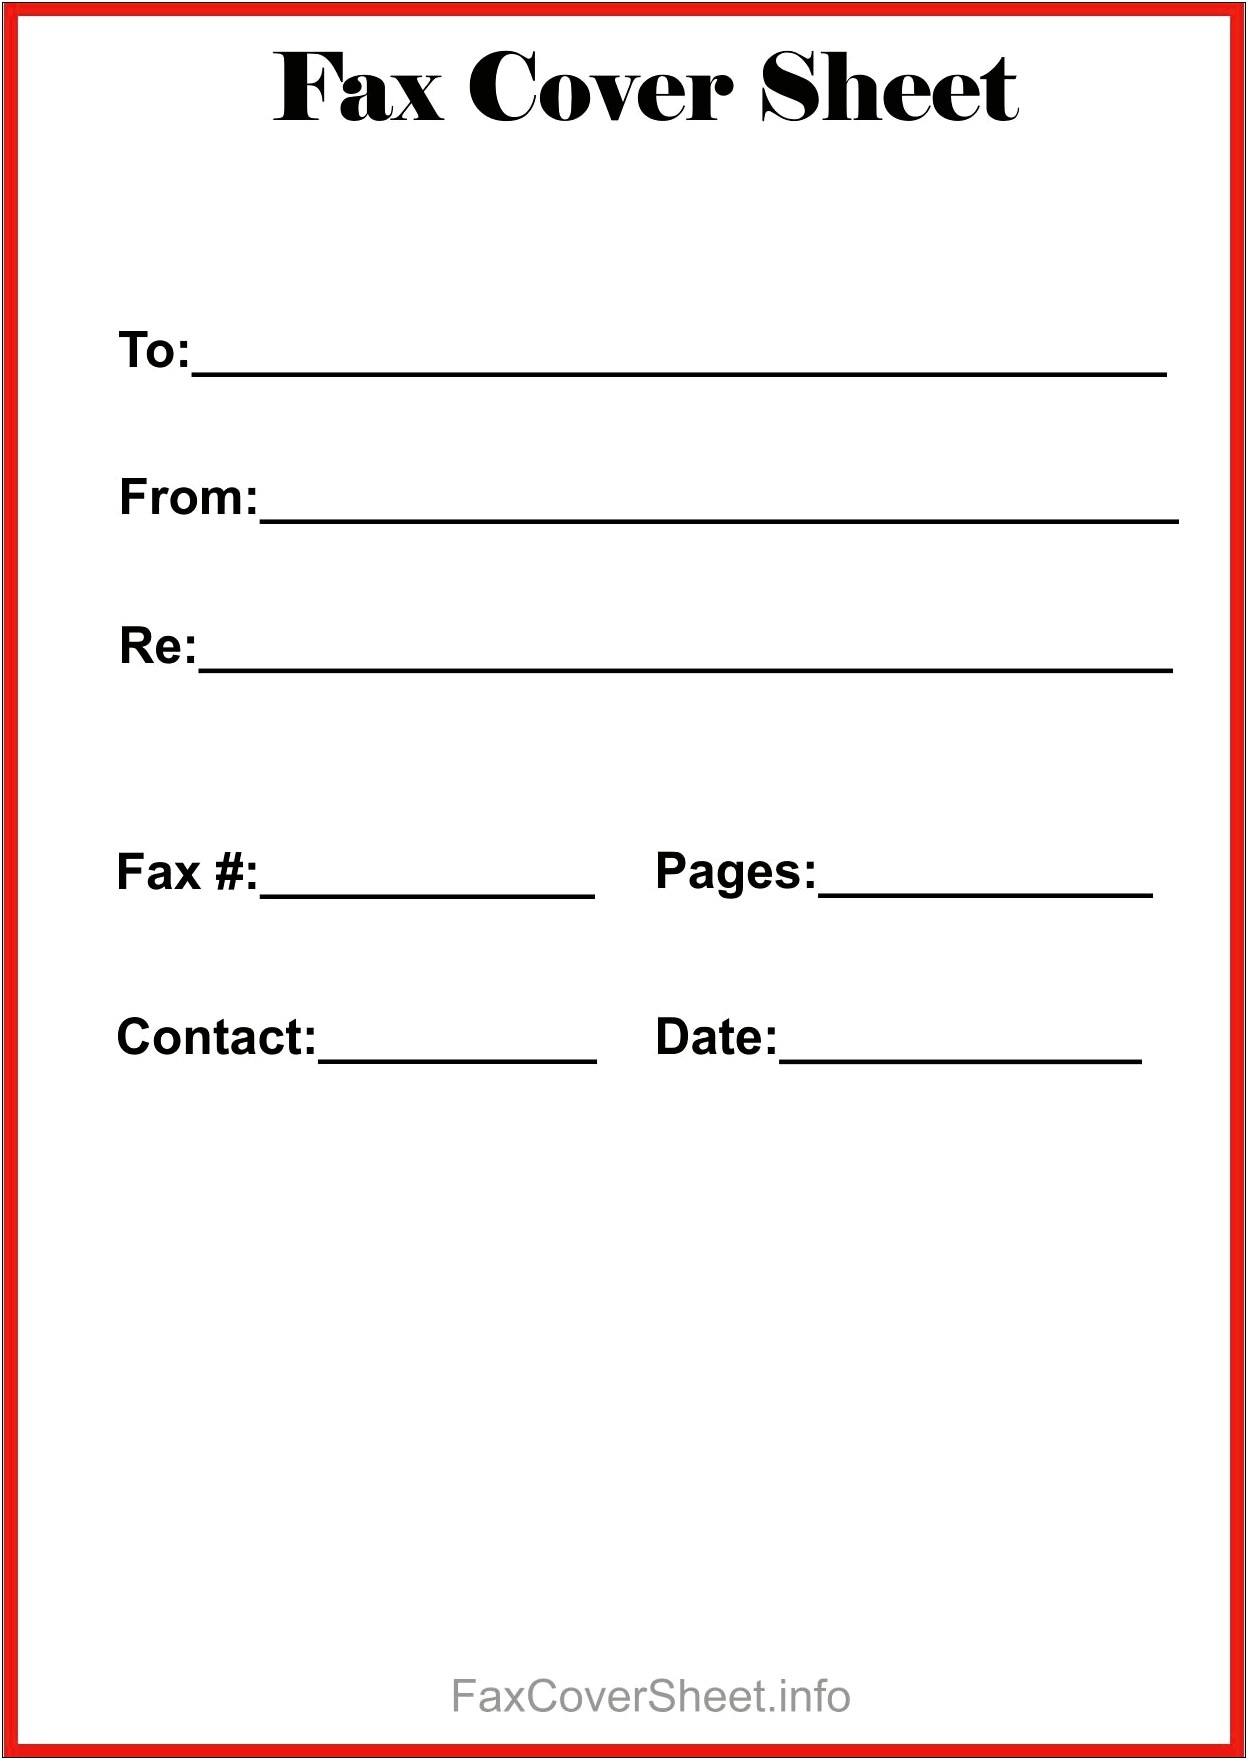 Resume Fax Cover Sheet Example